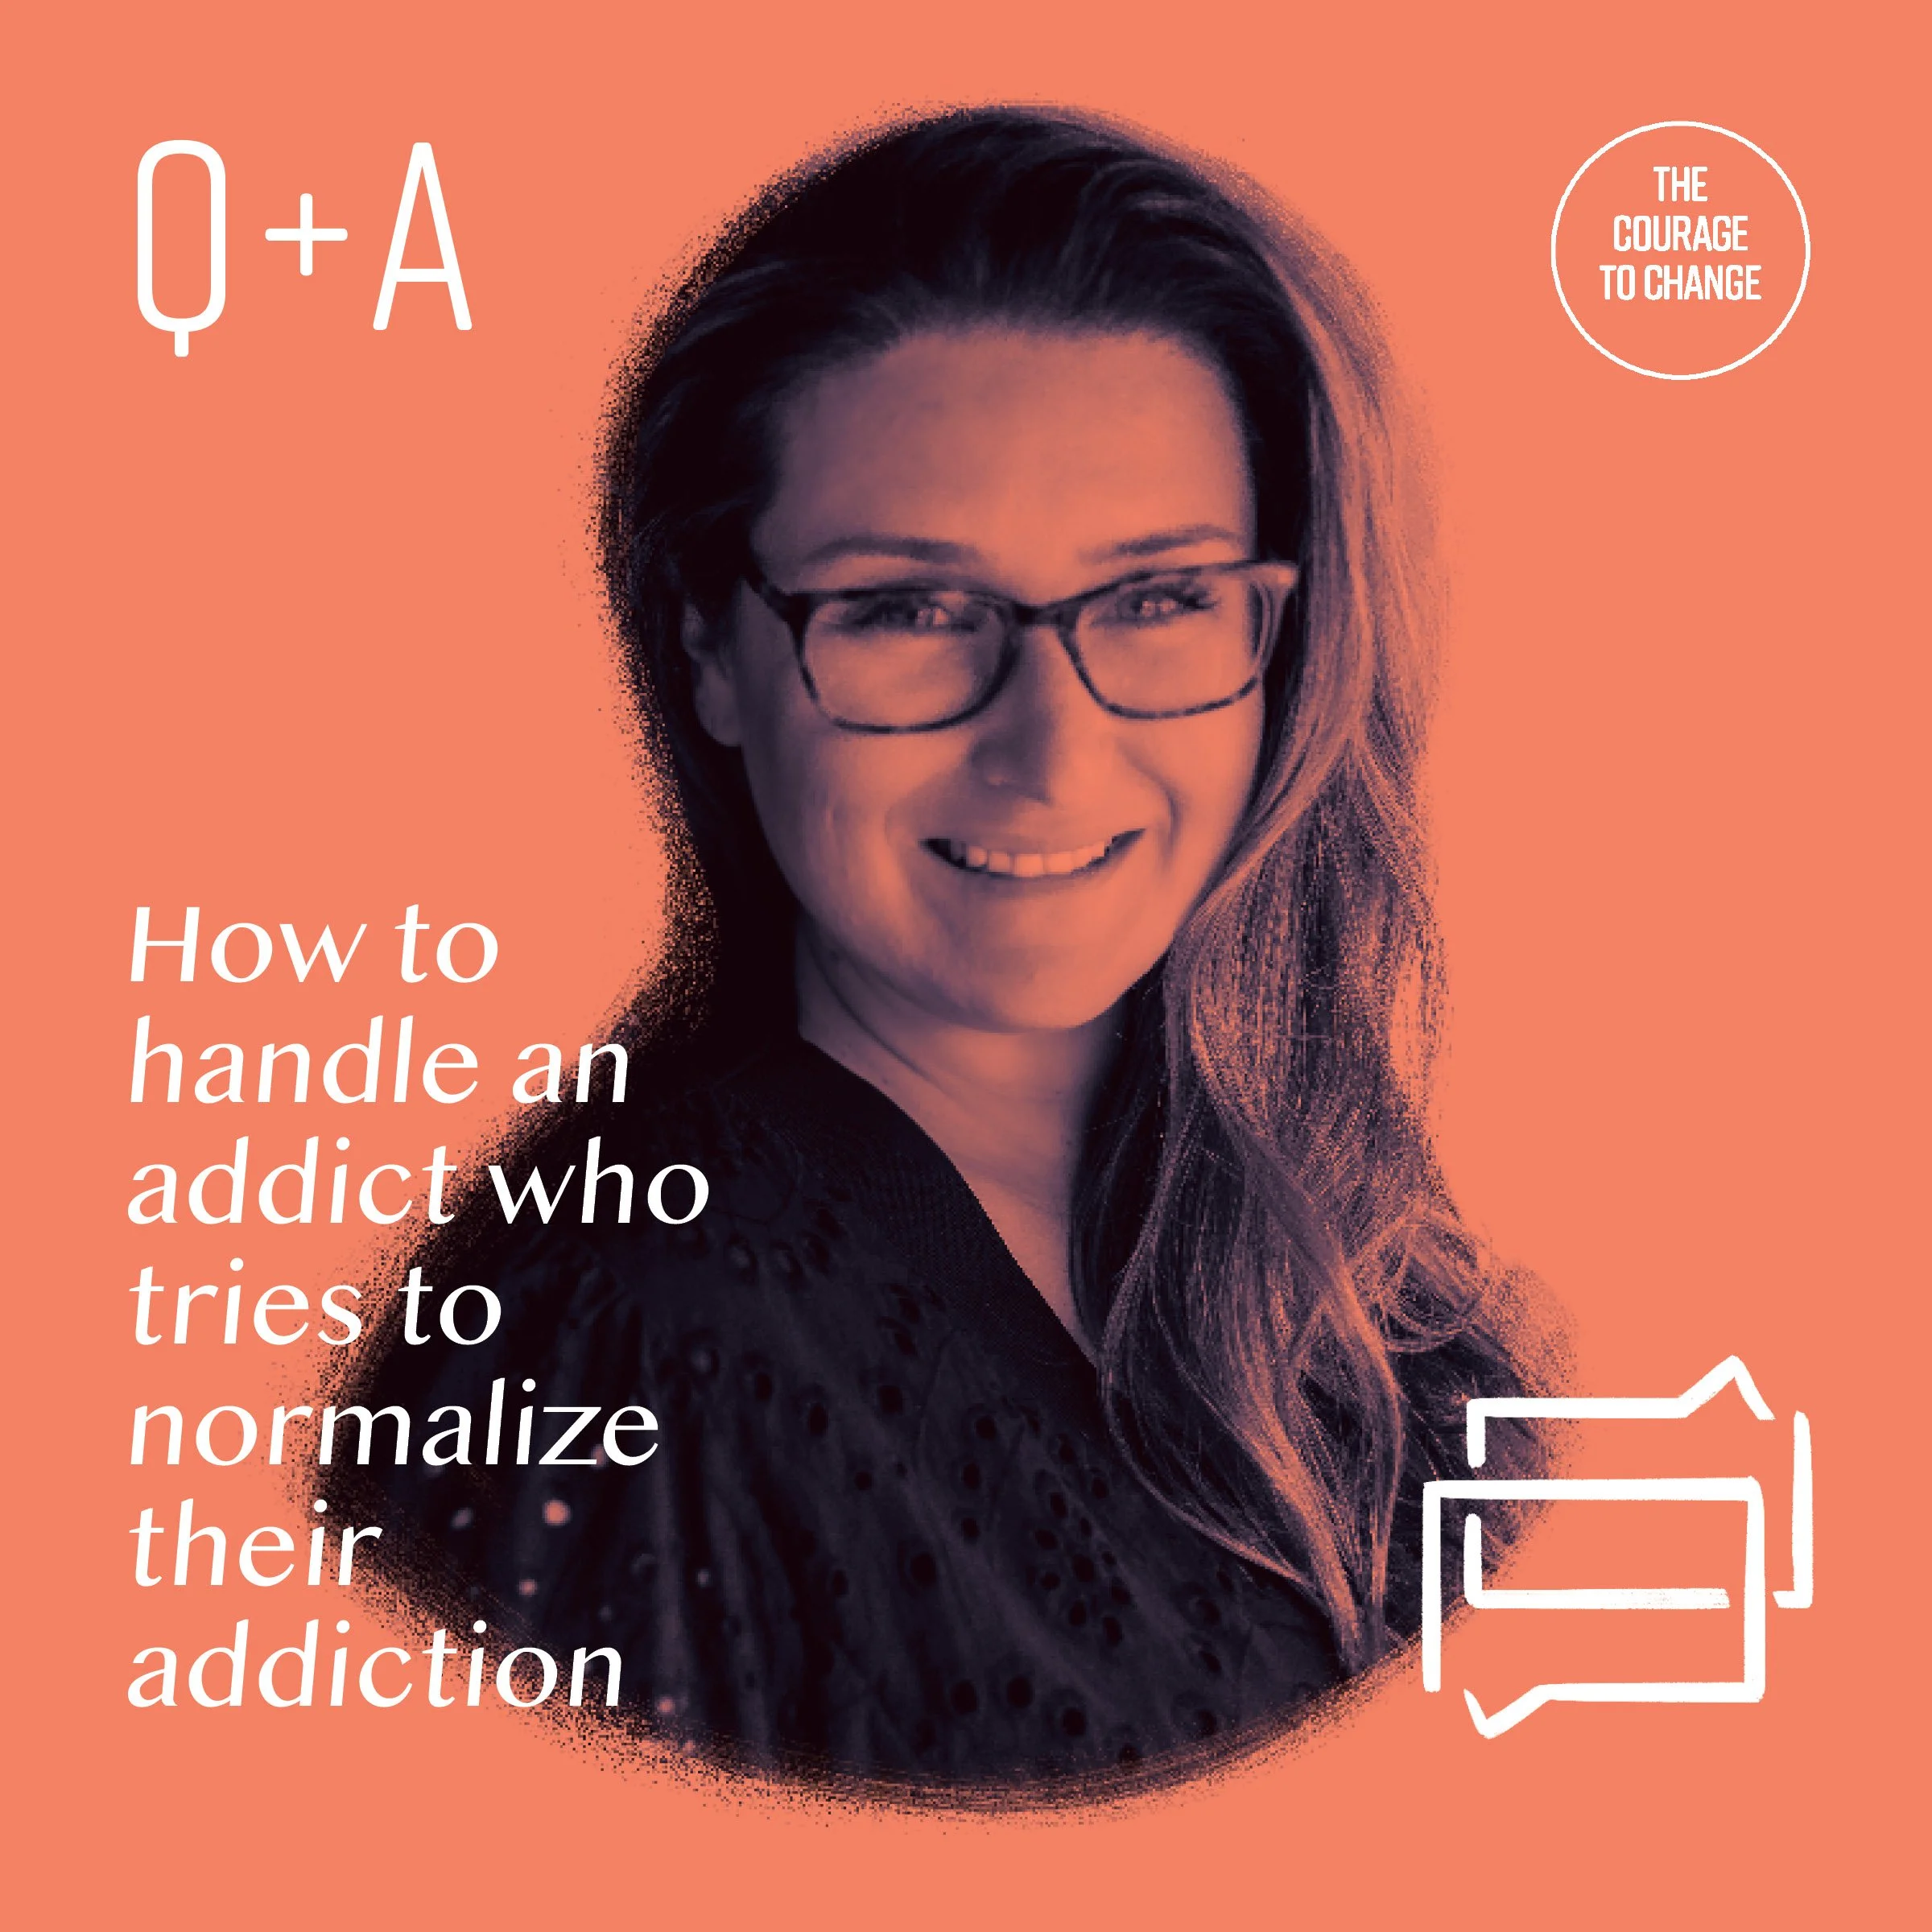 Q+A How to Handle An Addict Who Tries to Normalize Their Addiction